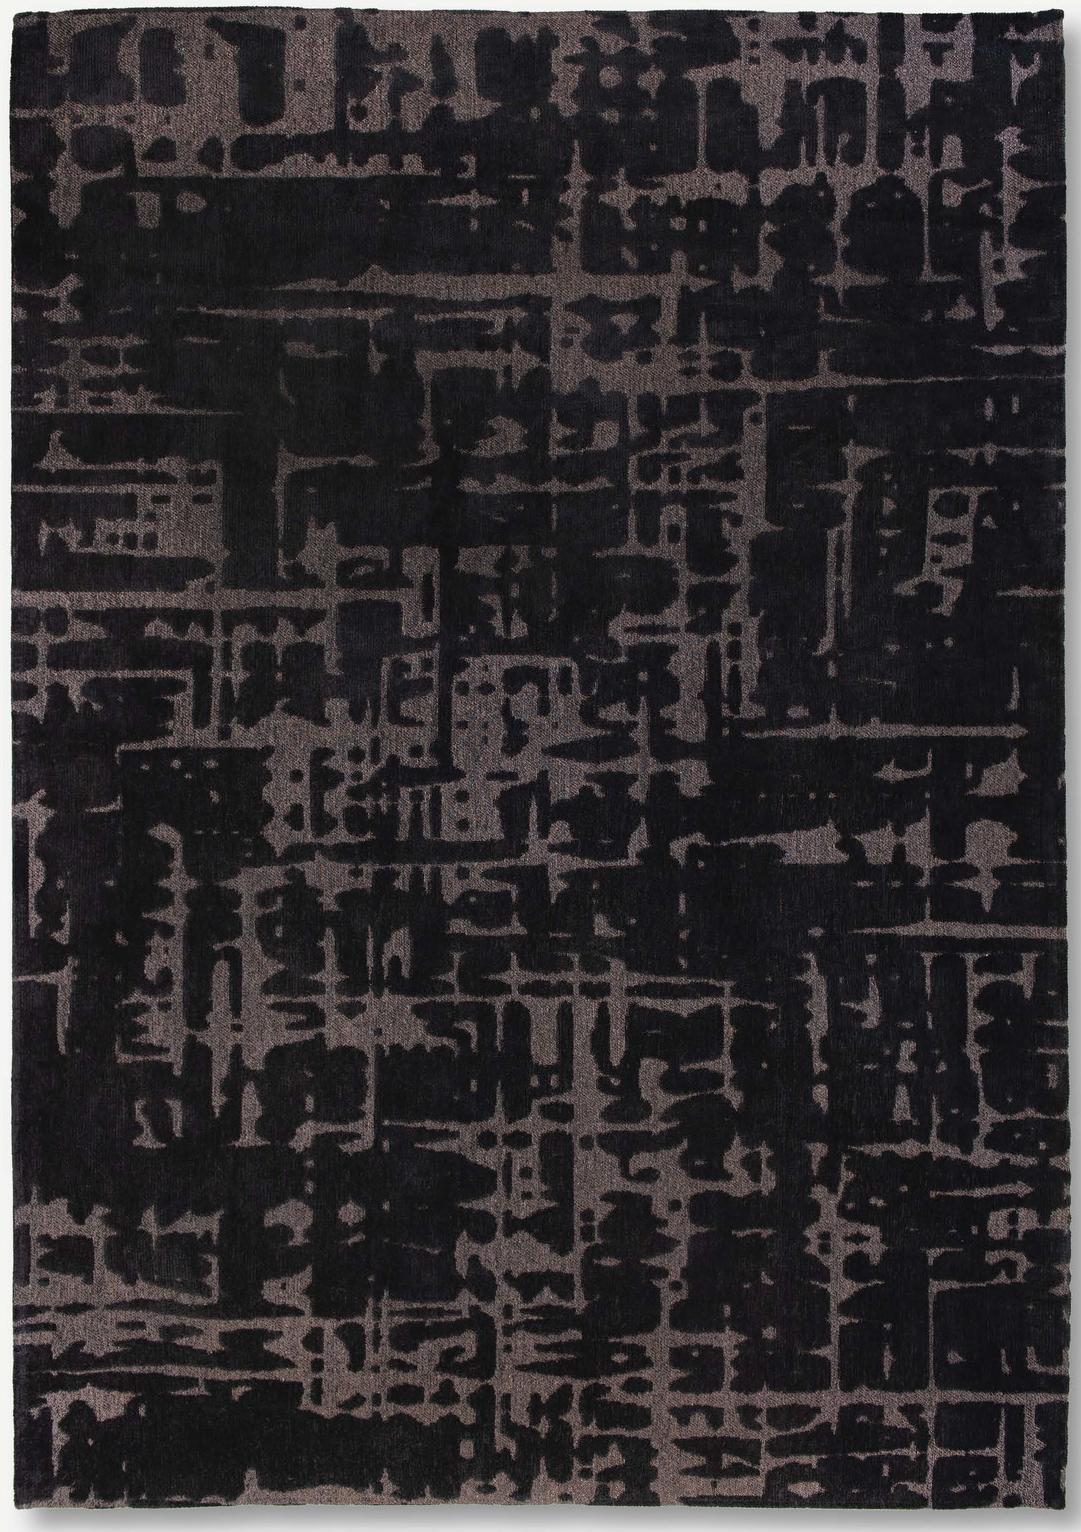 Abstract Black Belgian Rug ☞ Size: 4' 7" x 6' 7" (140 x 200 cm)